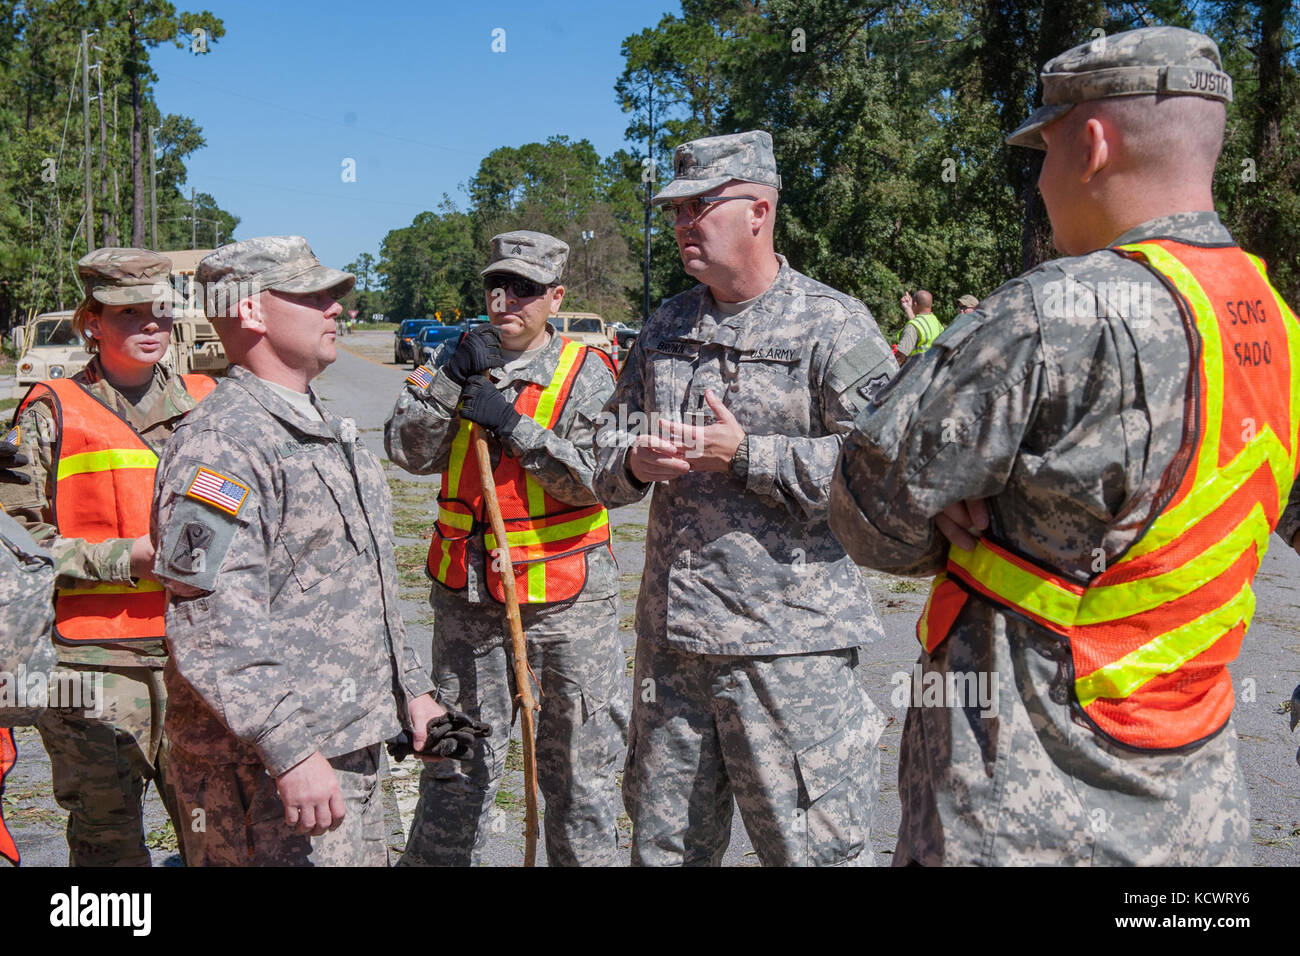 U.S. Army Chaplain, 1st Lt. Richard Brown of the 122nd Engineer Battalion for the South Carolina Army National Guard, leads a group of Soldiers in a moment prayer as they work to remove debris and clear the roadways in Bluffton, South Carolina, Oct. 9, 2016. Approximately 2,800 S.C. National Guard Soldiers and Airmen have been activated since Oct. 4, 2016, to support state and county emergency management agencies and local first responders after Governor Nikki Haley declared a State of Emergency. (U.S. Army National Guard photos by Sgt. Brian Calhoun, 108th Public Affairs Detachment) Stock Photo